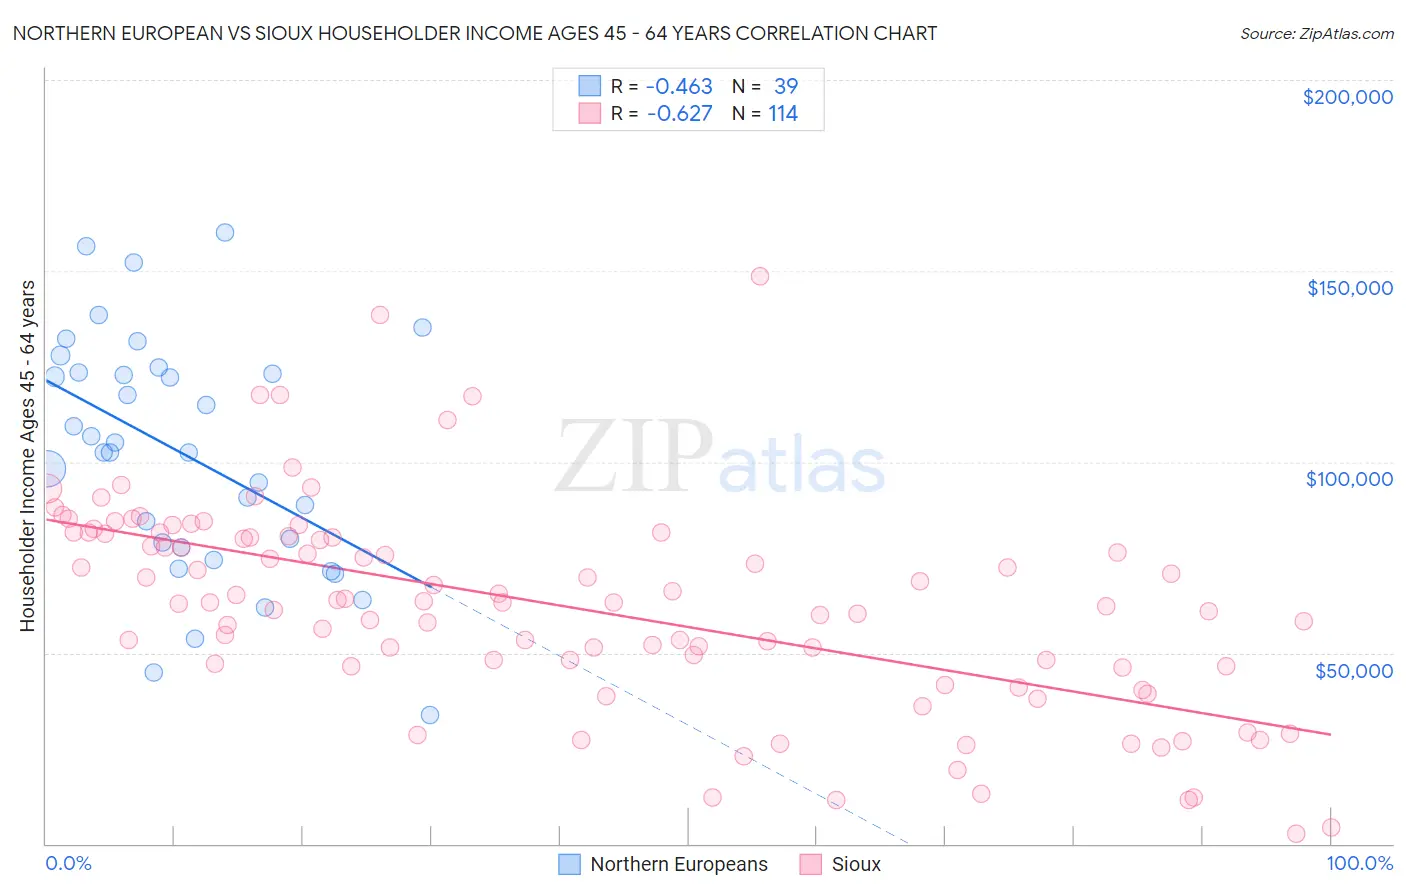 Northern European vs Sioux Householder Income Ages 45 - 64 years